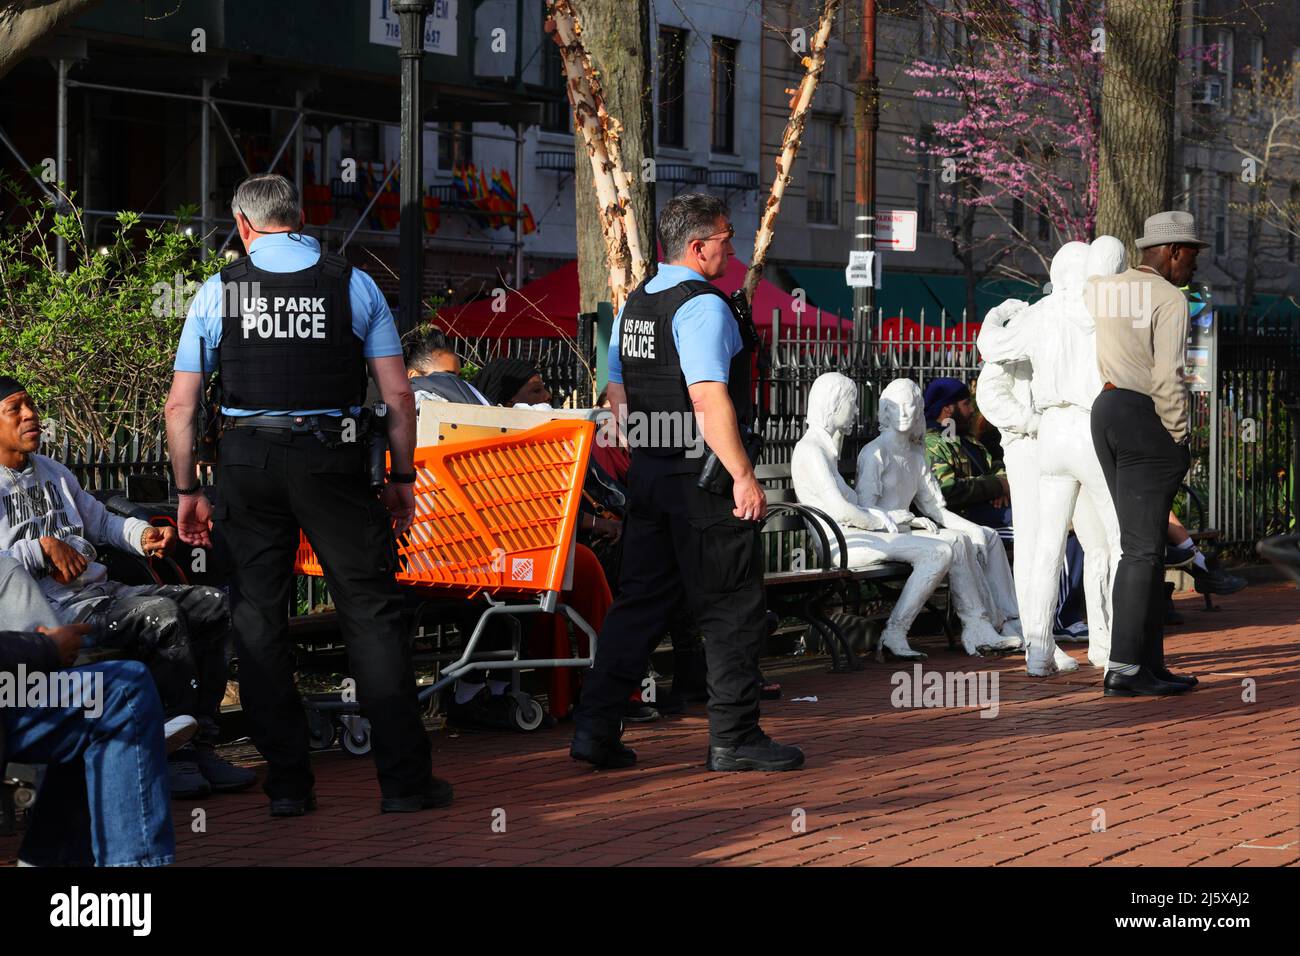 United States Park Police am Stonewall National Monument im Stadtteil Greenwich Village in New York, 22. April 2022. Stockfoto